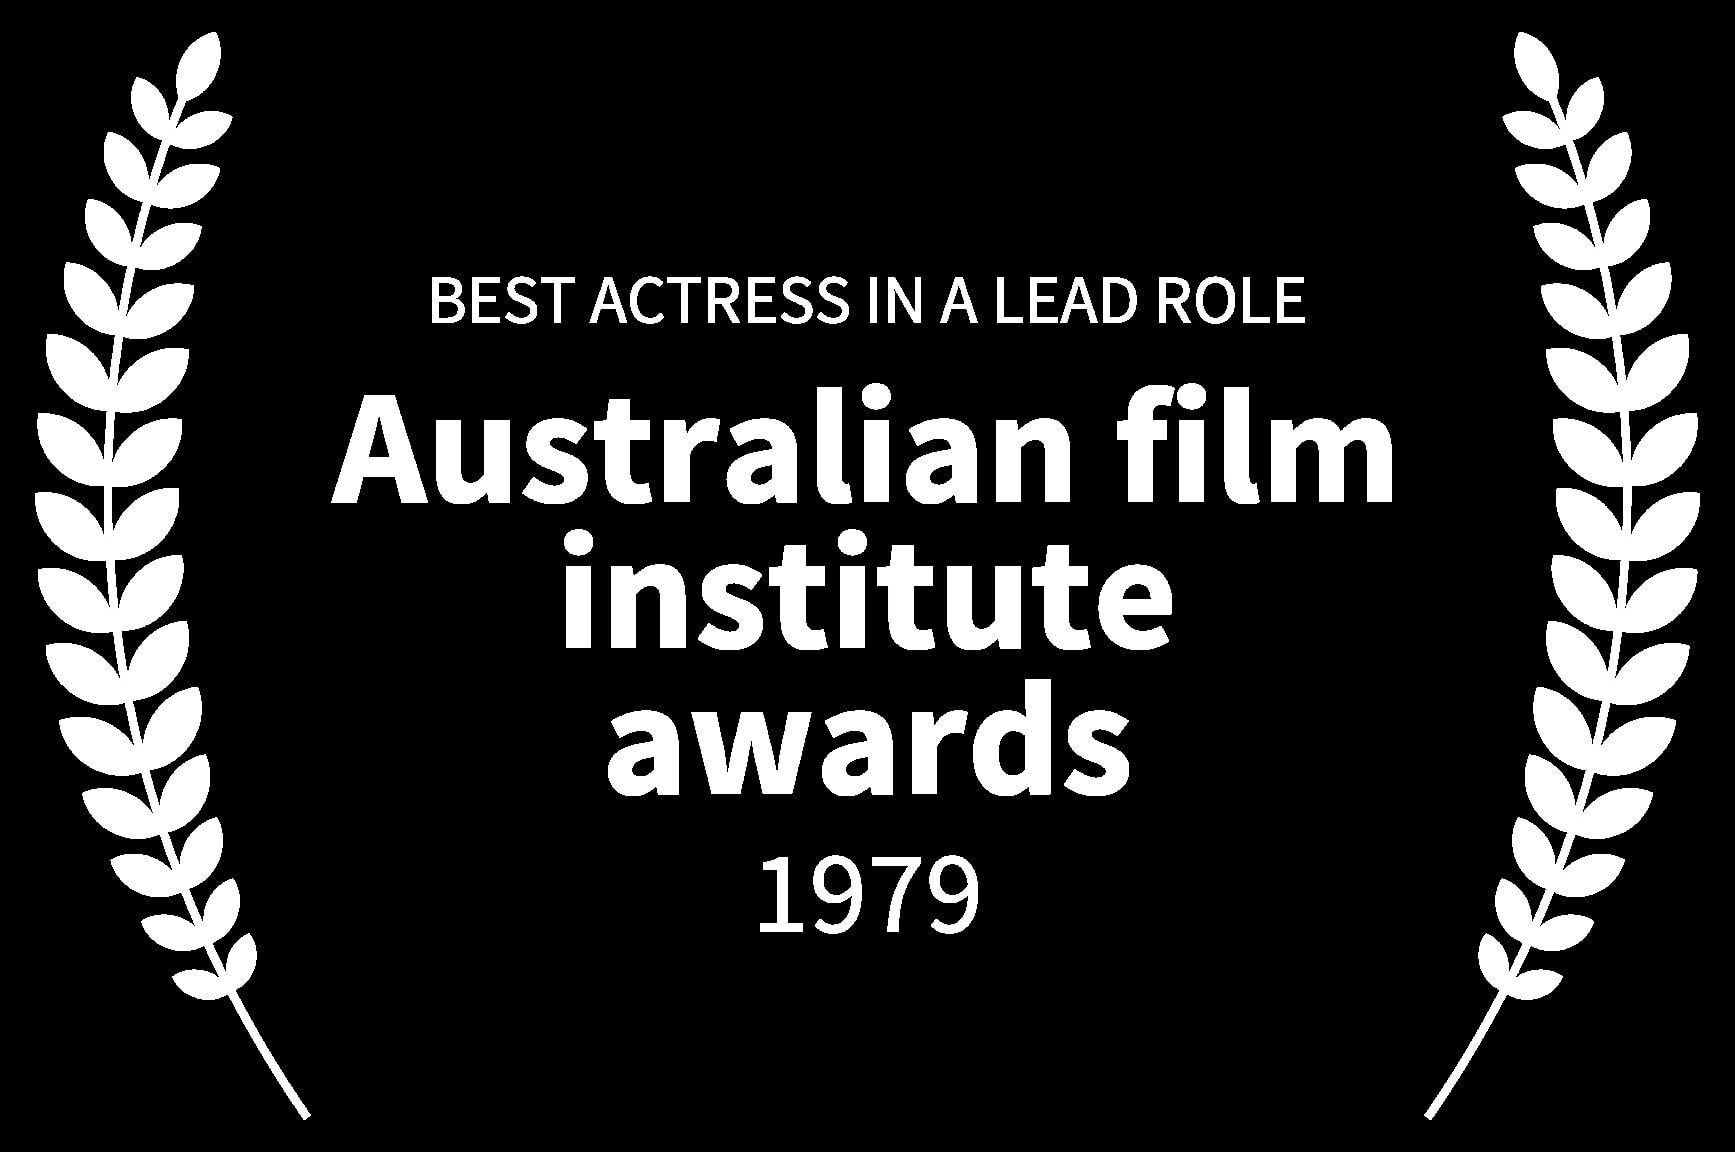 BEST ACTRESS IN A LEAD ROLE - Australian film institute awards - 1979 - SNAPSHOT